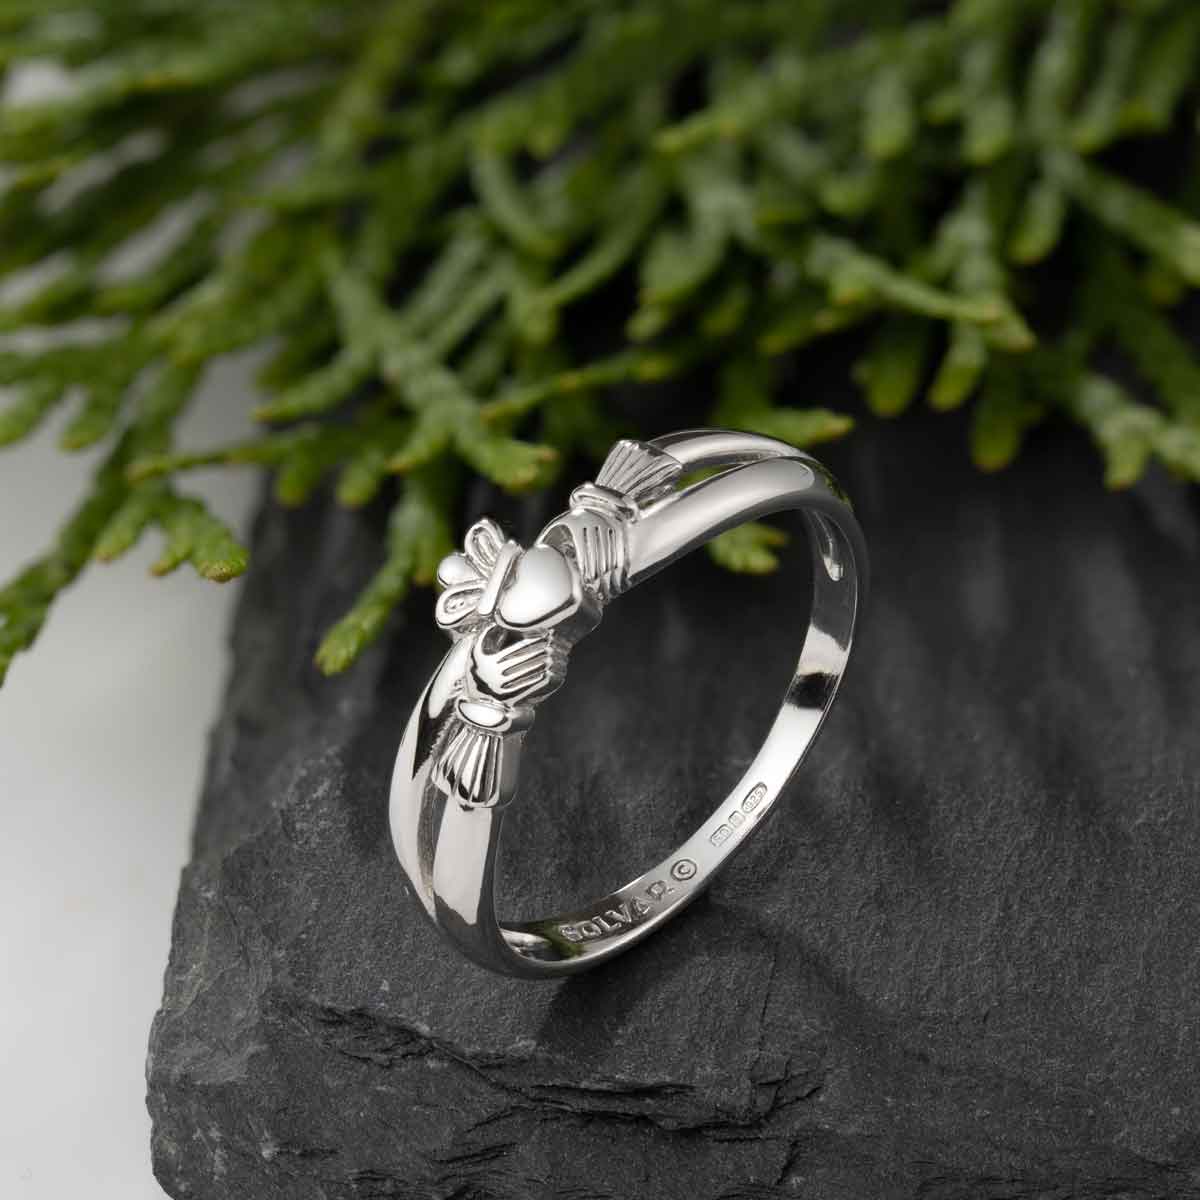 Product image for Claddagh Ring - Ladies Sterling Silver Claddagh Kiss